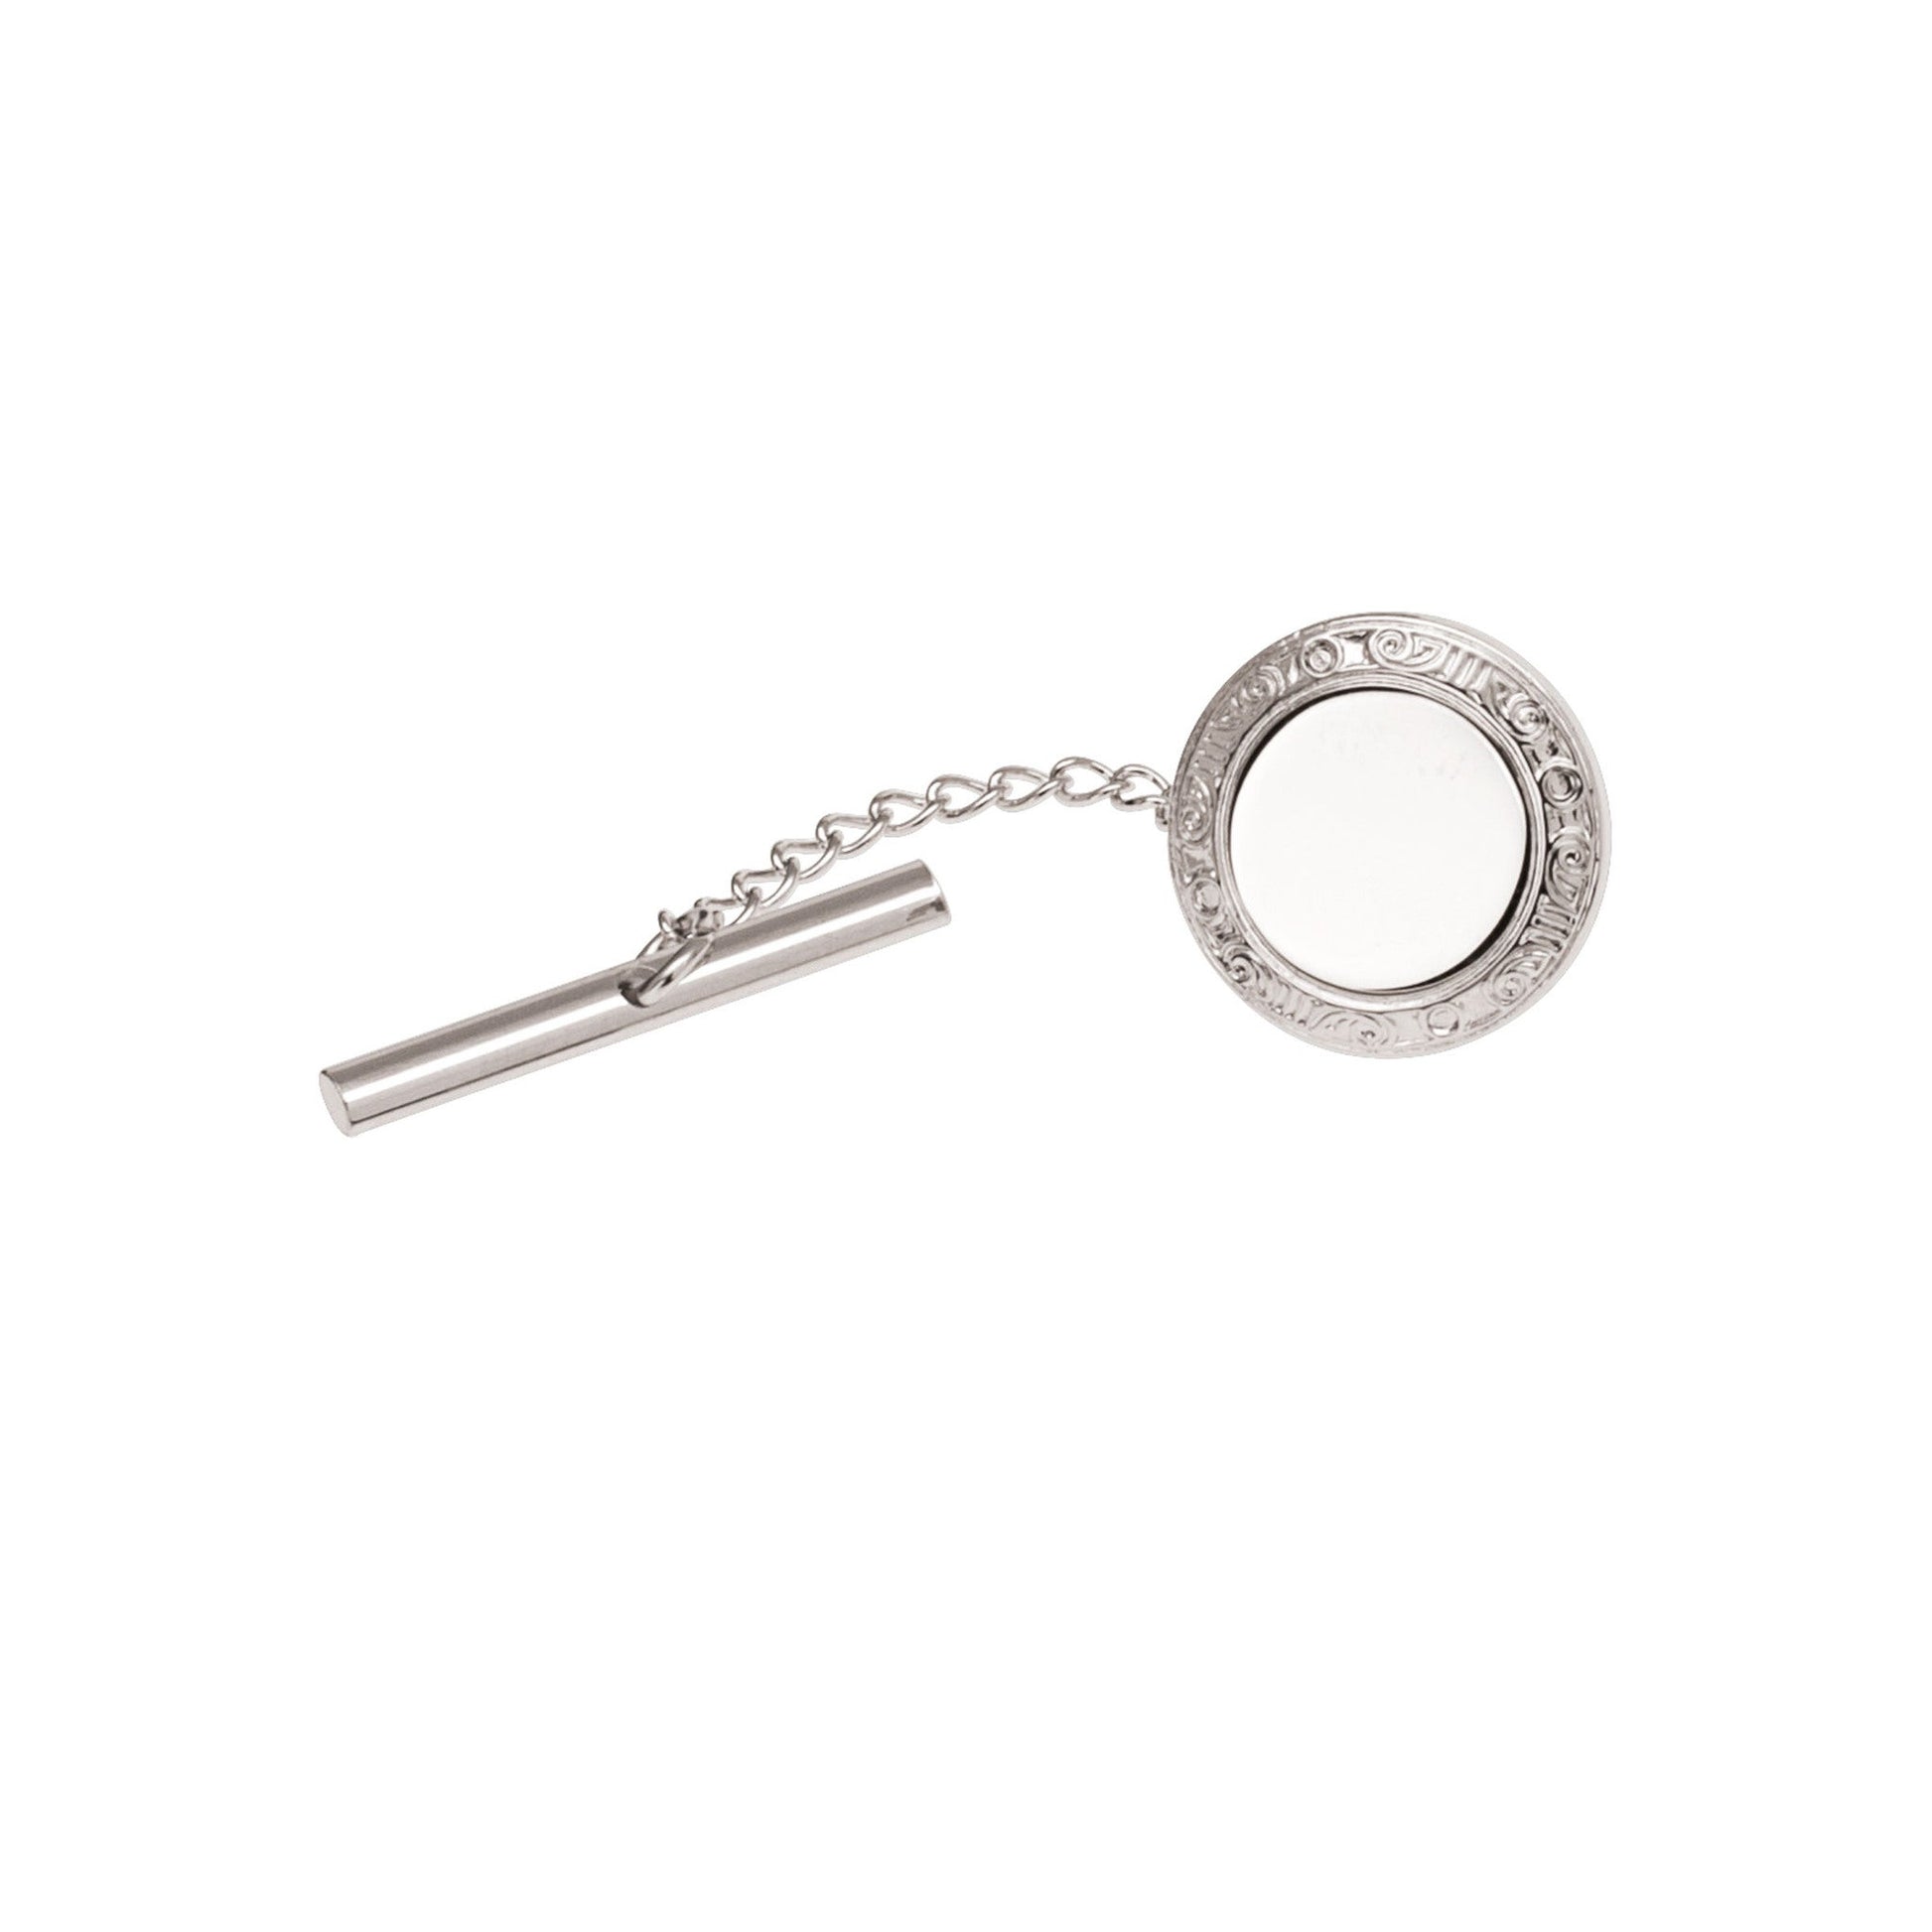 A round tie tack with filigree edge displayed on a neutral white background.